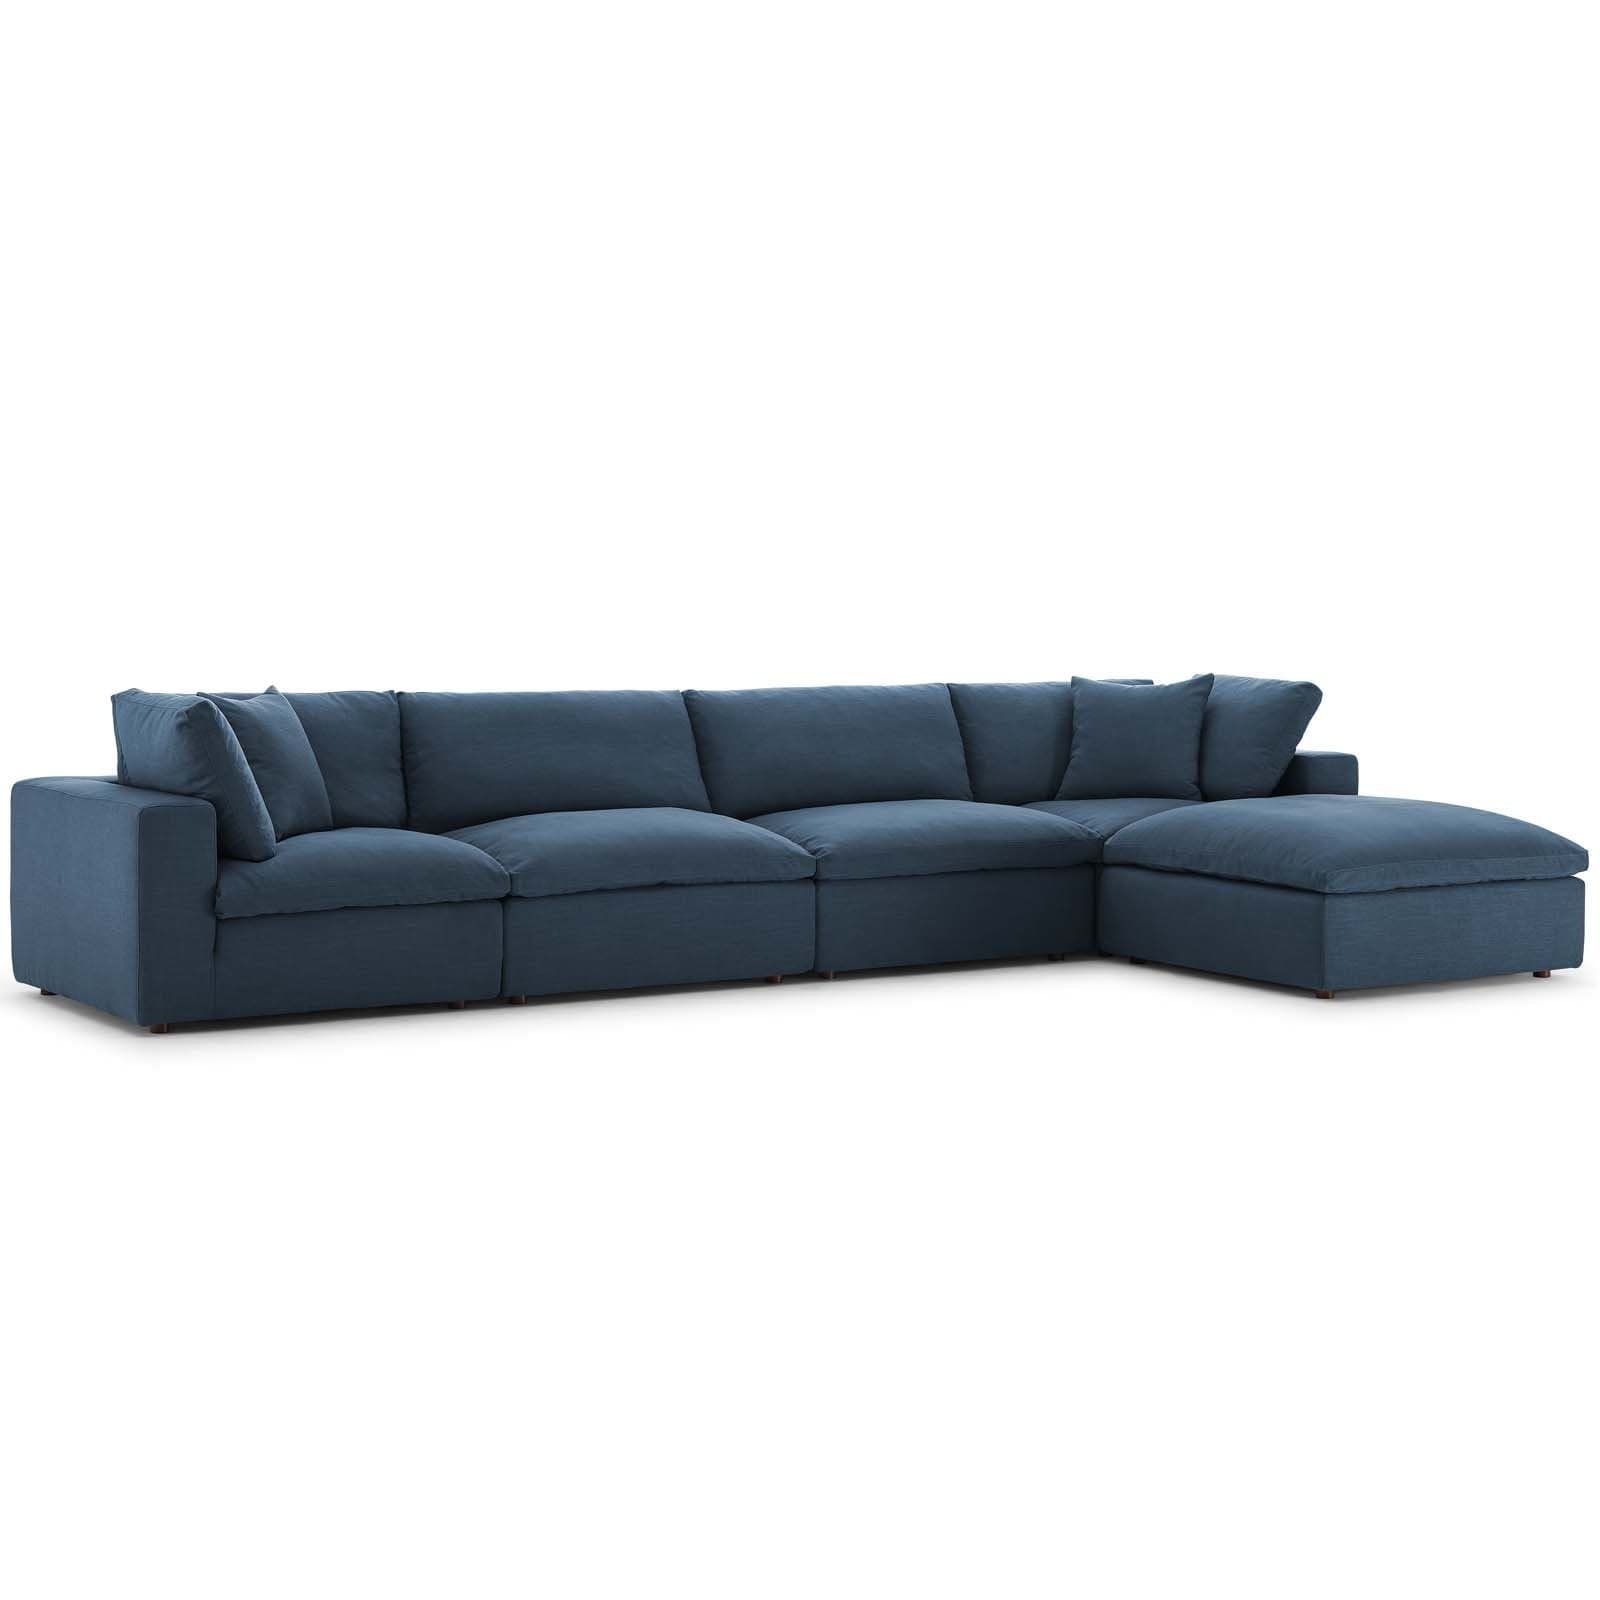 Down Filled 5 pcs Sectional Sofa Set - hollywood-glam-furnitures